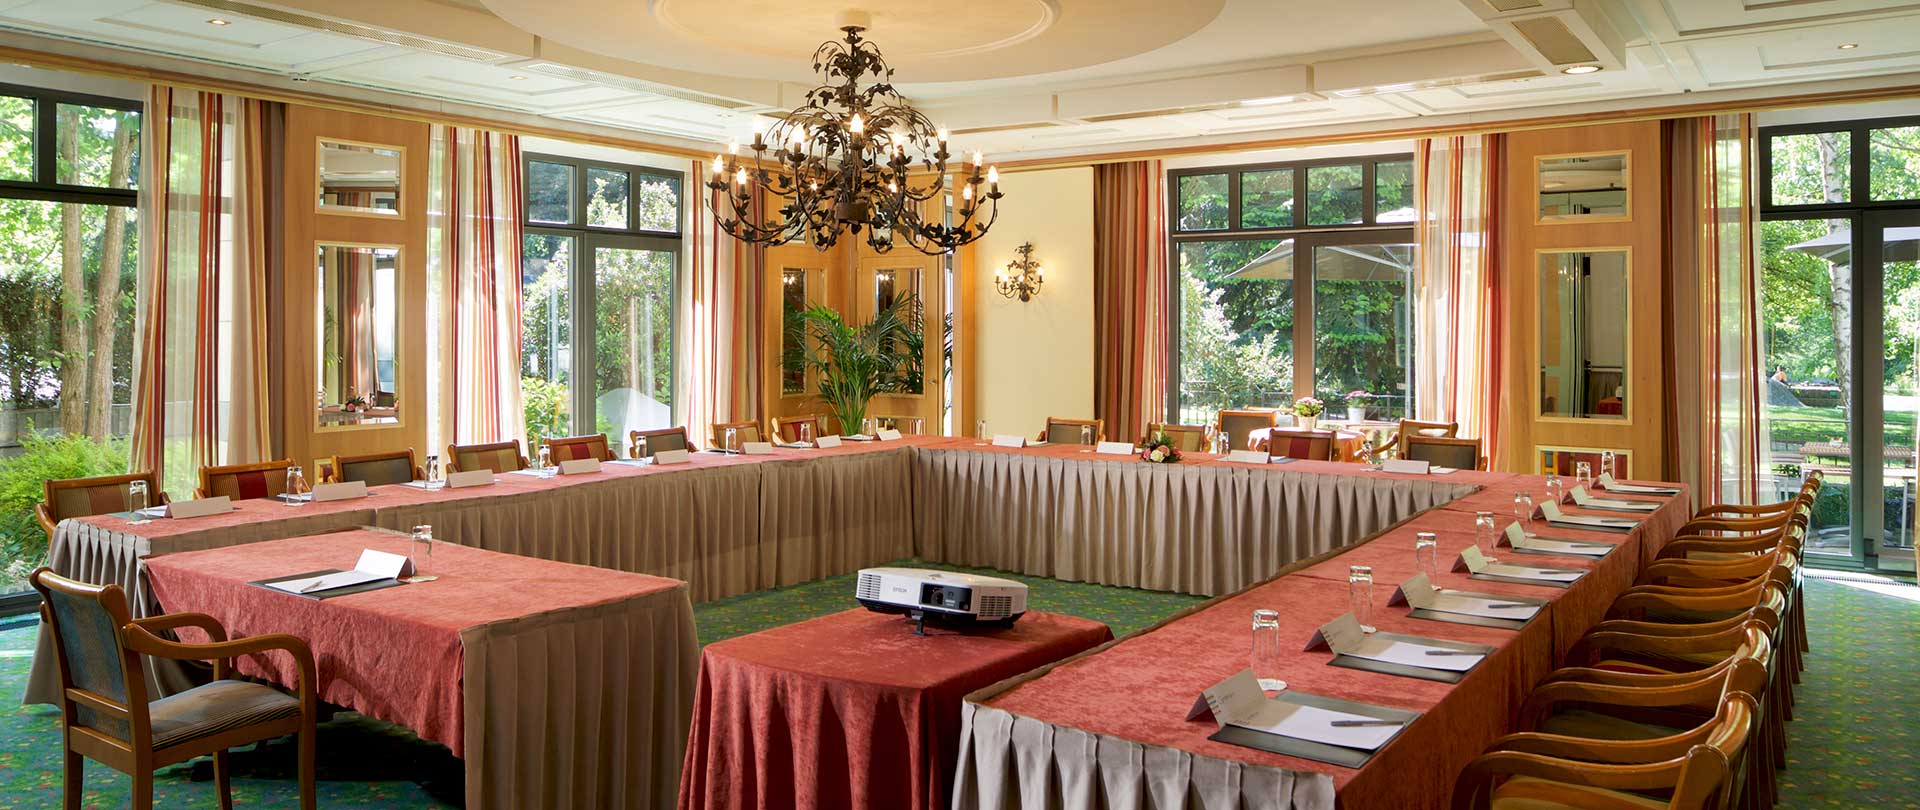 Hotel Parc Belair Meeting Room, Luxembourg